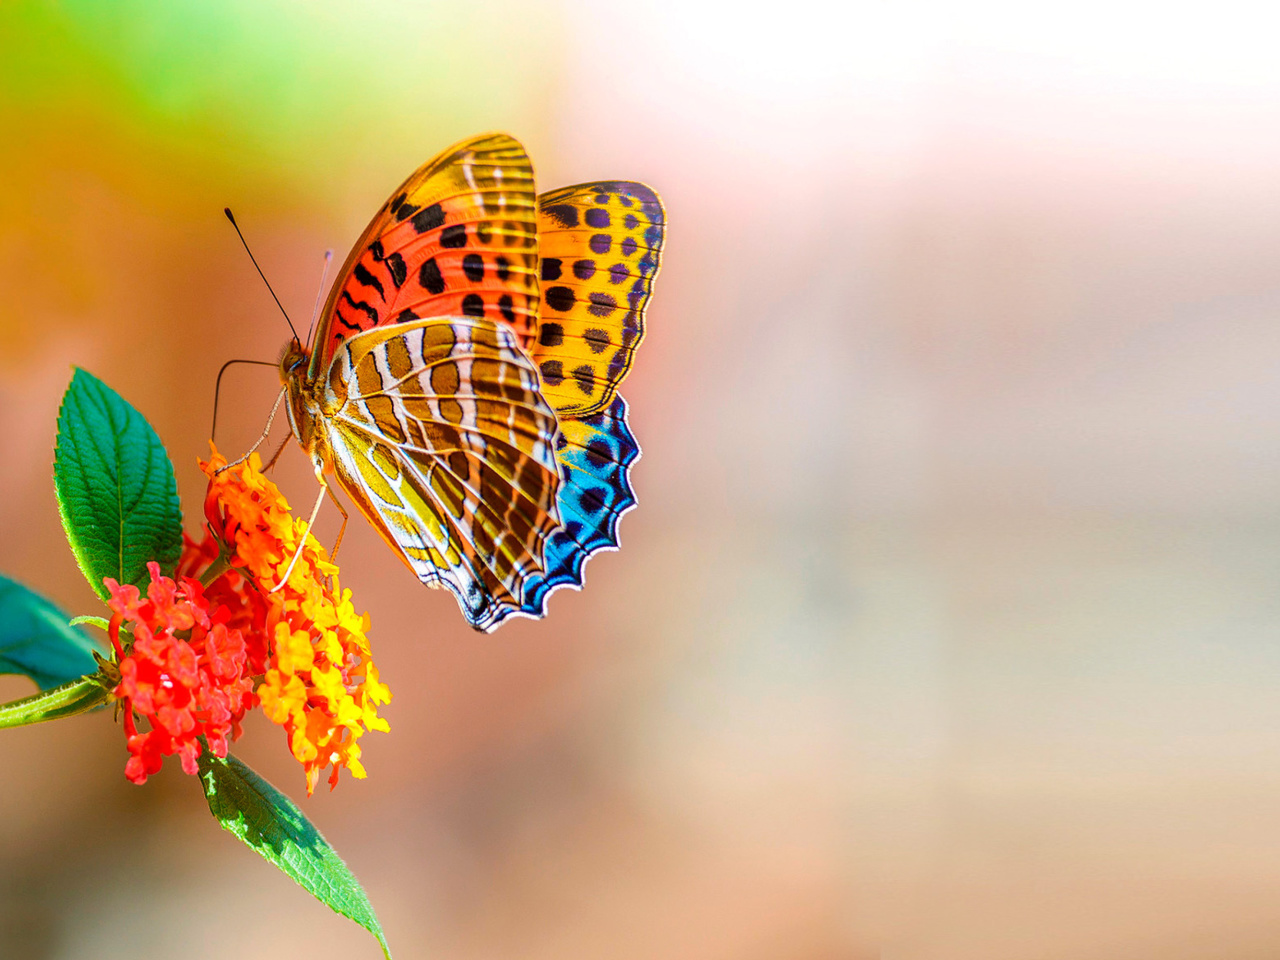 Colorful Animated Butterfly wallpaper 1280x960